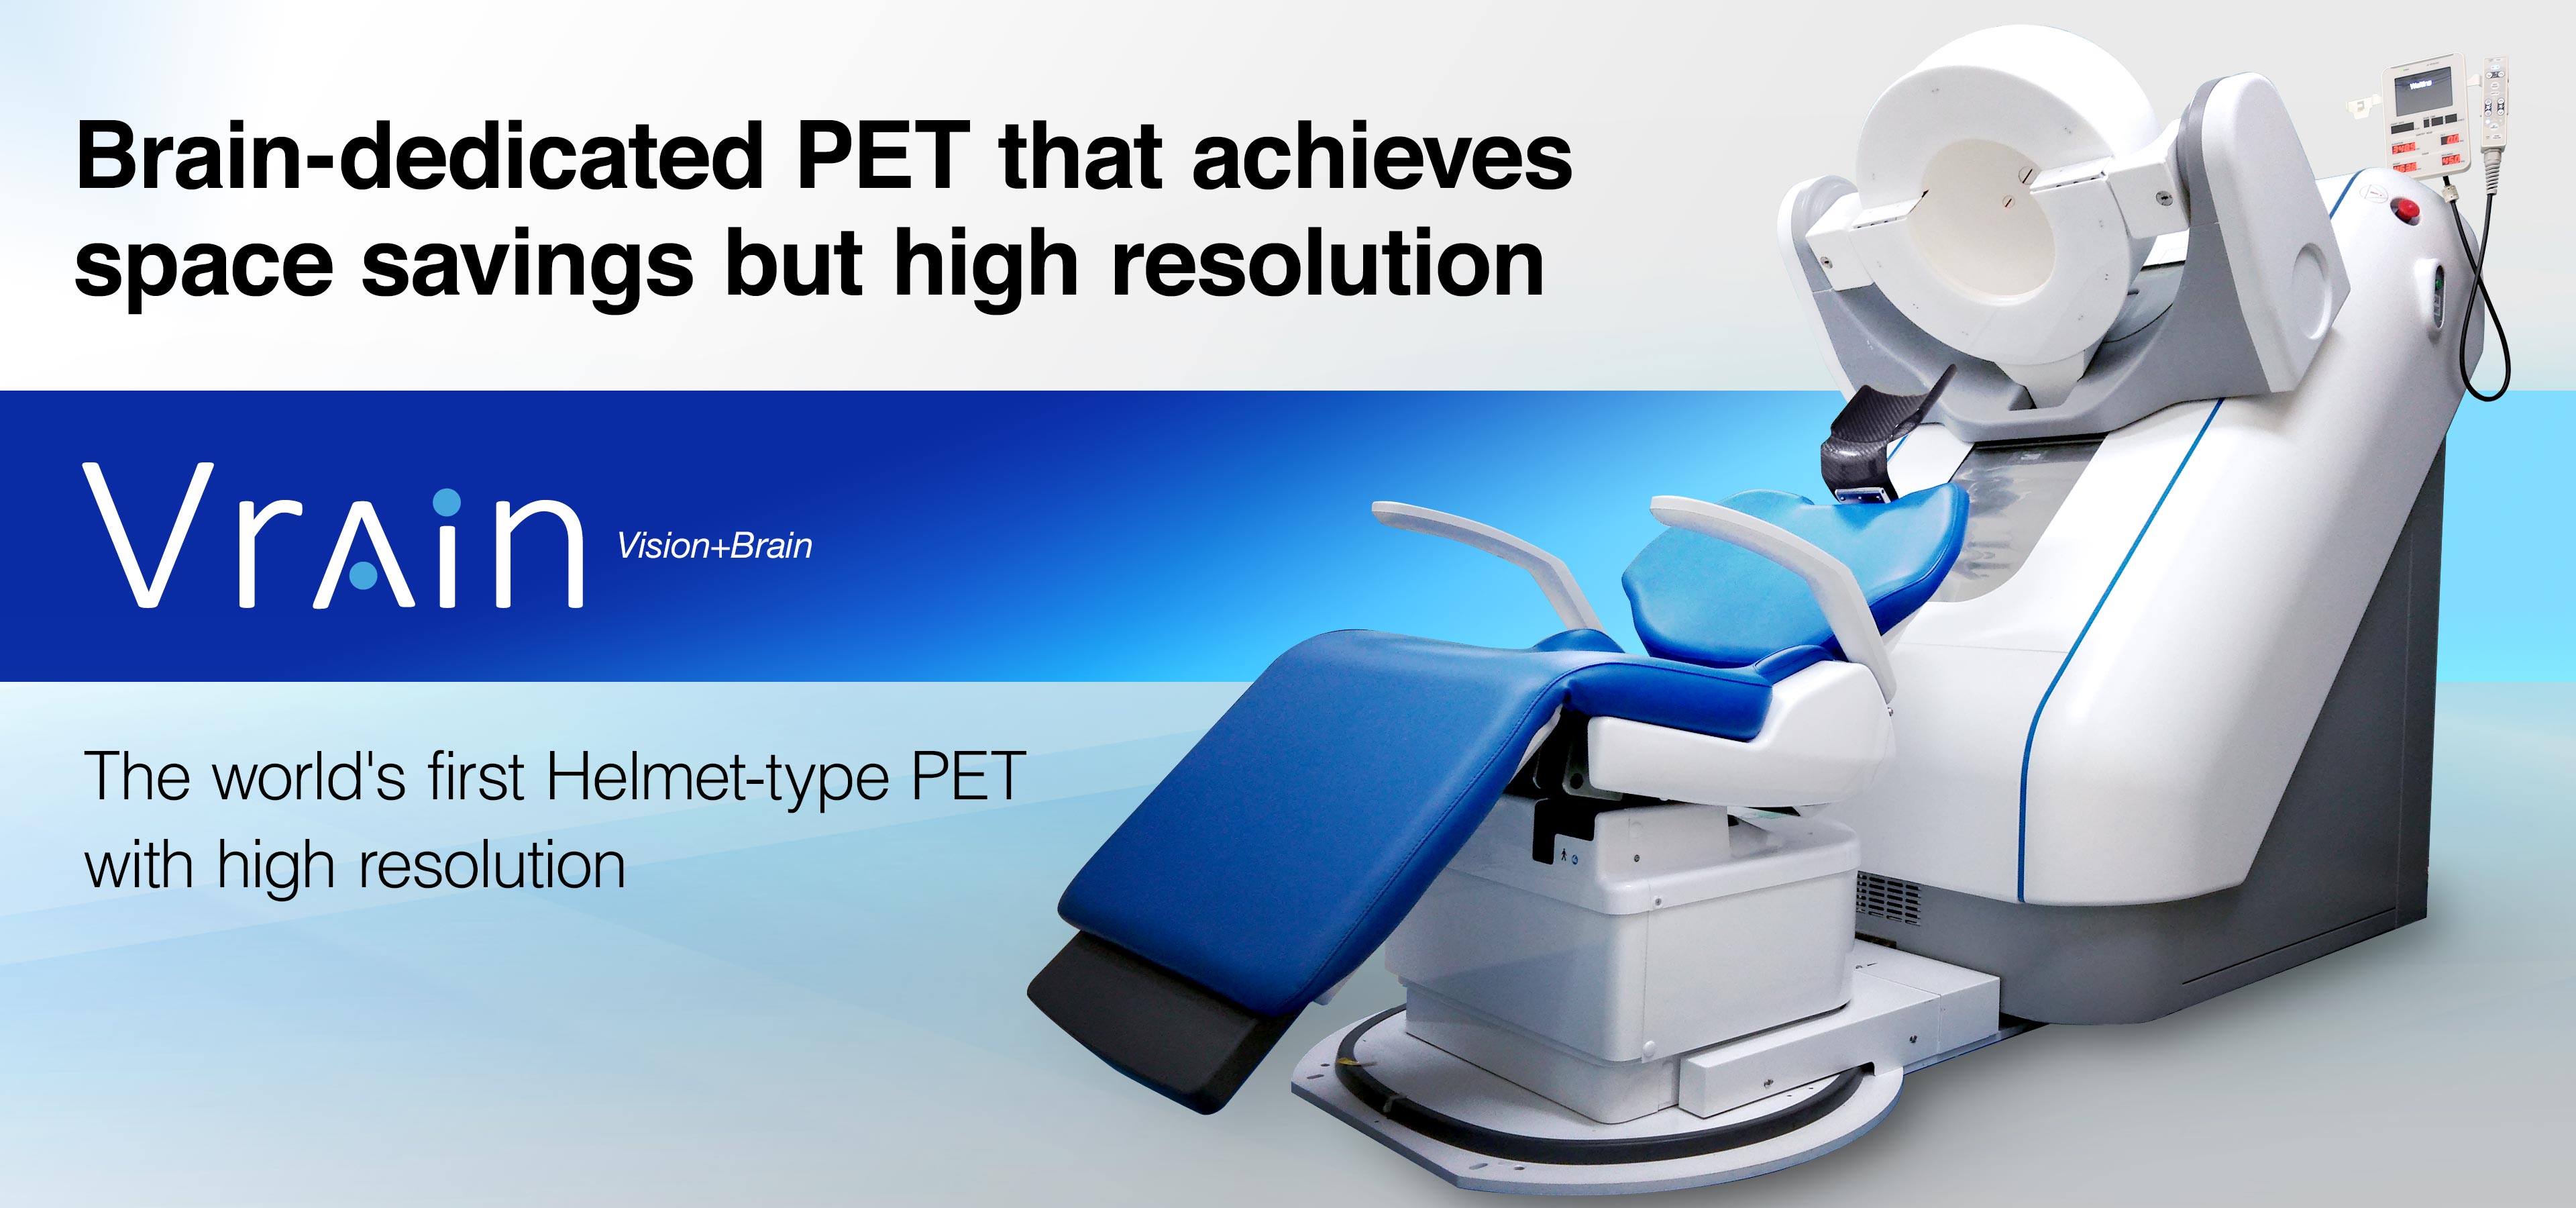 Brain-dedicated PET that achieves space savings but high resolution